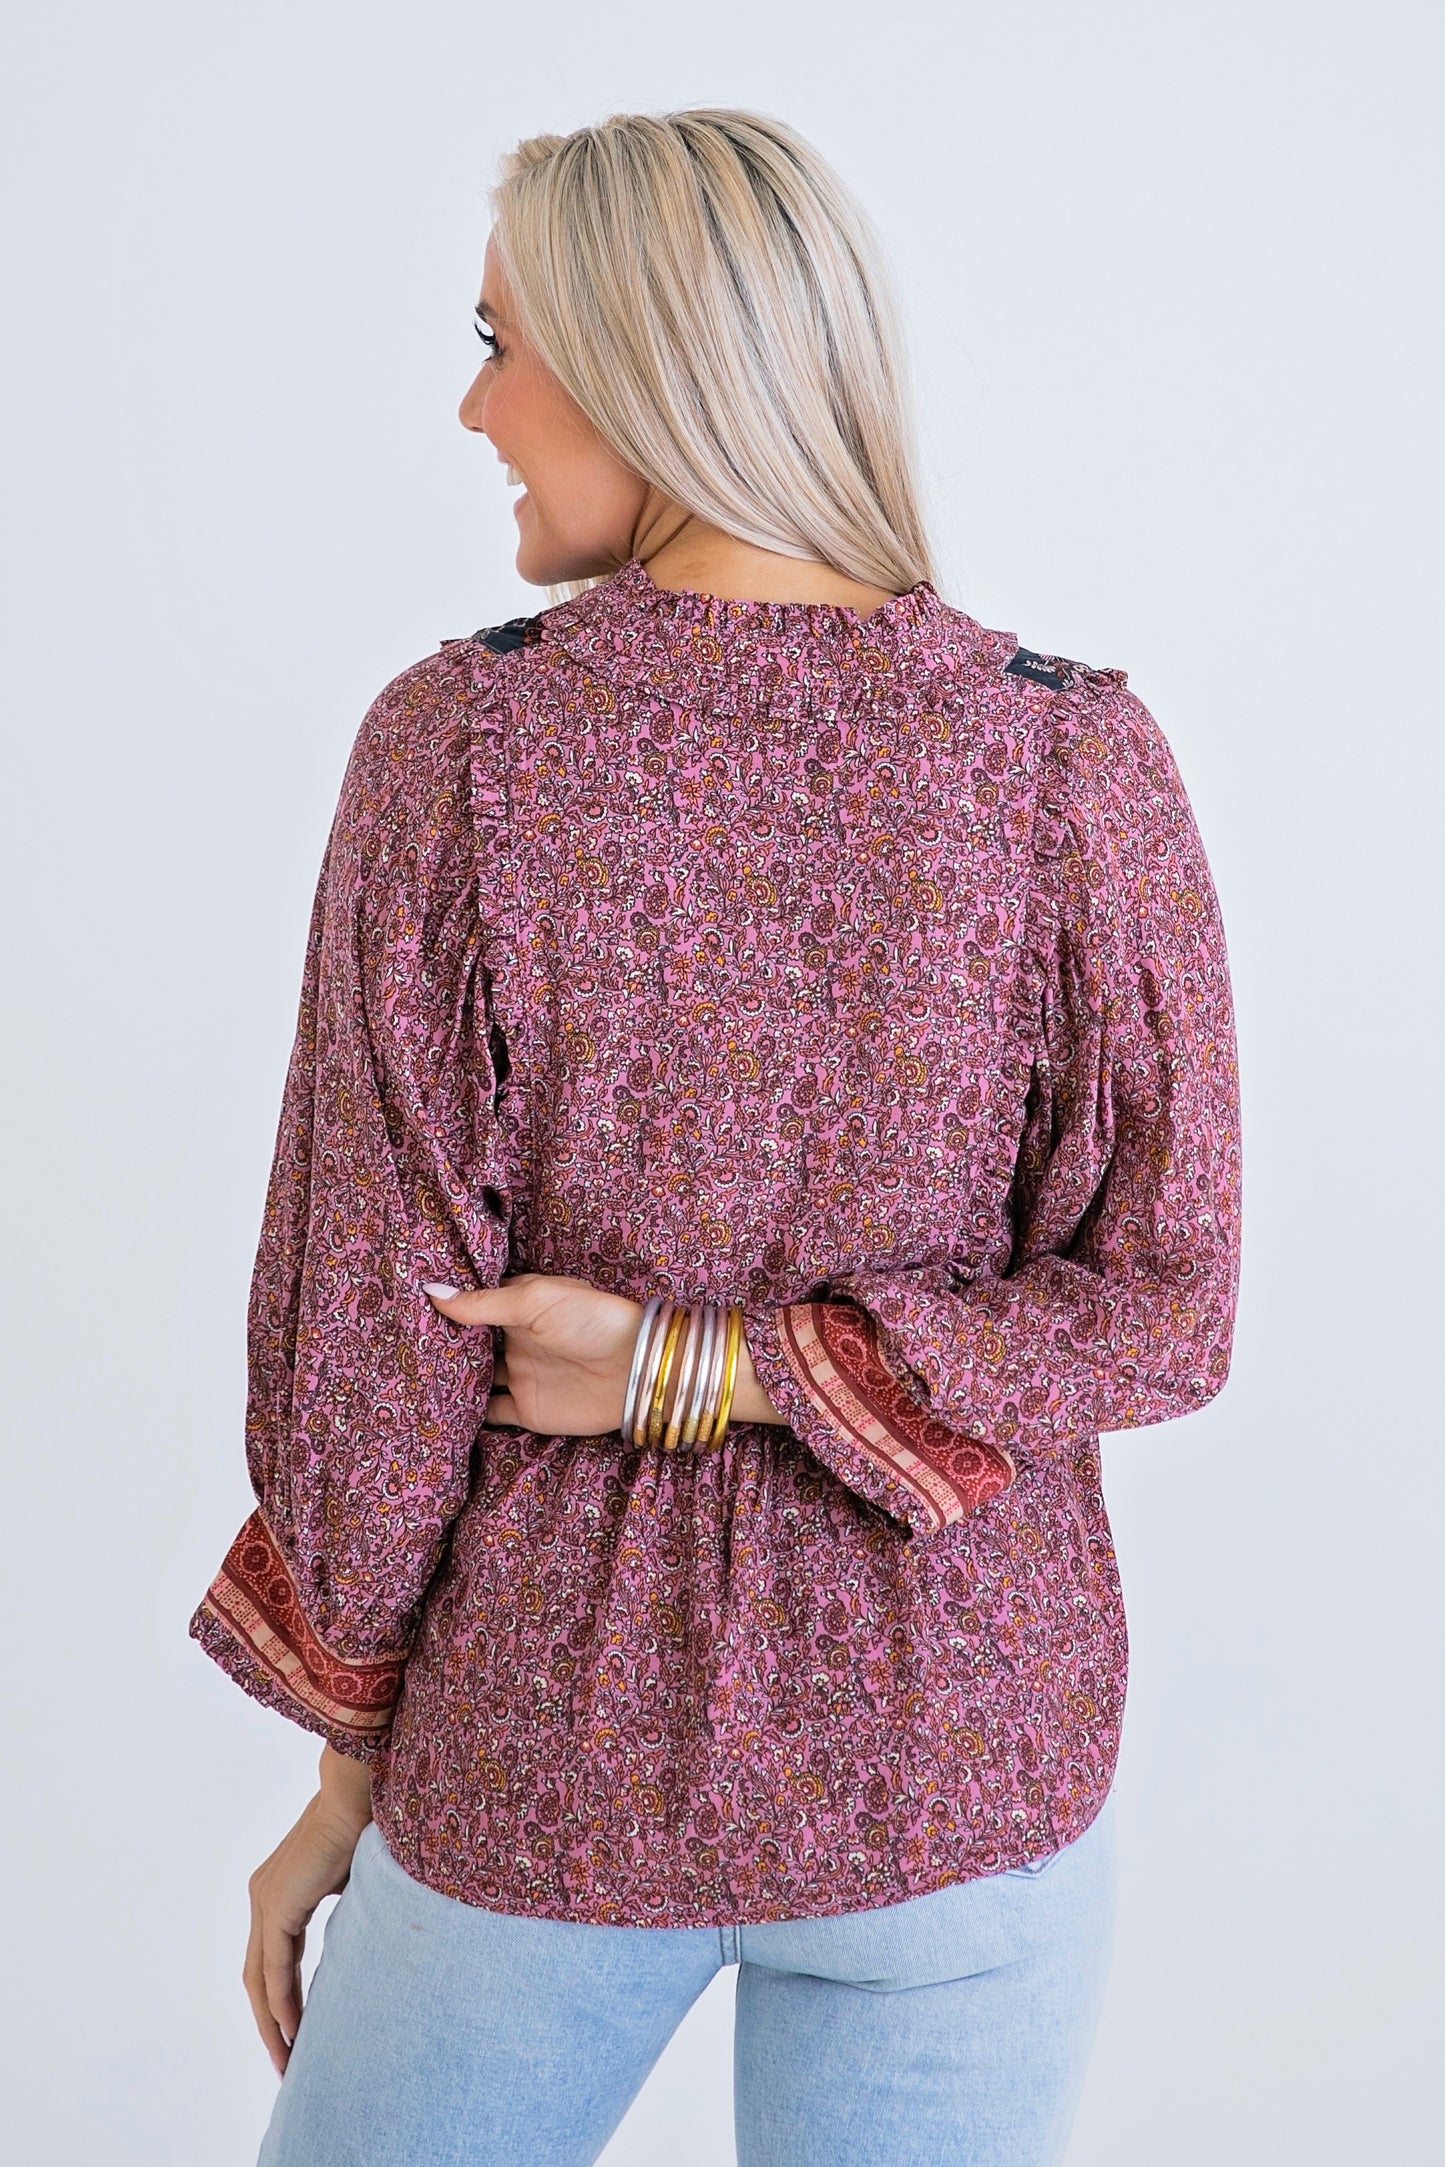 Mulberry Paisley Top